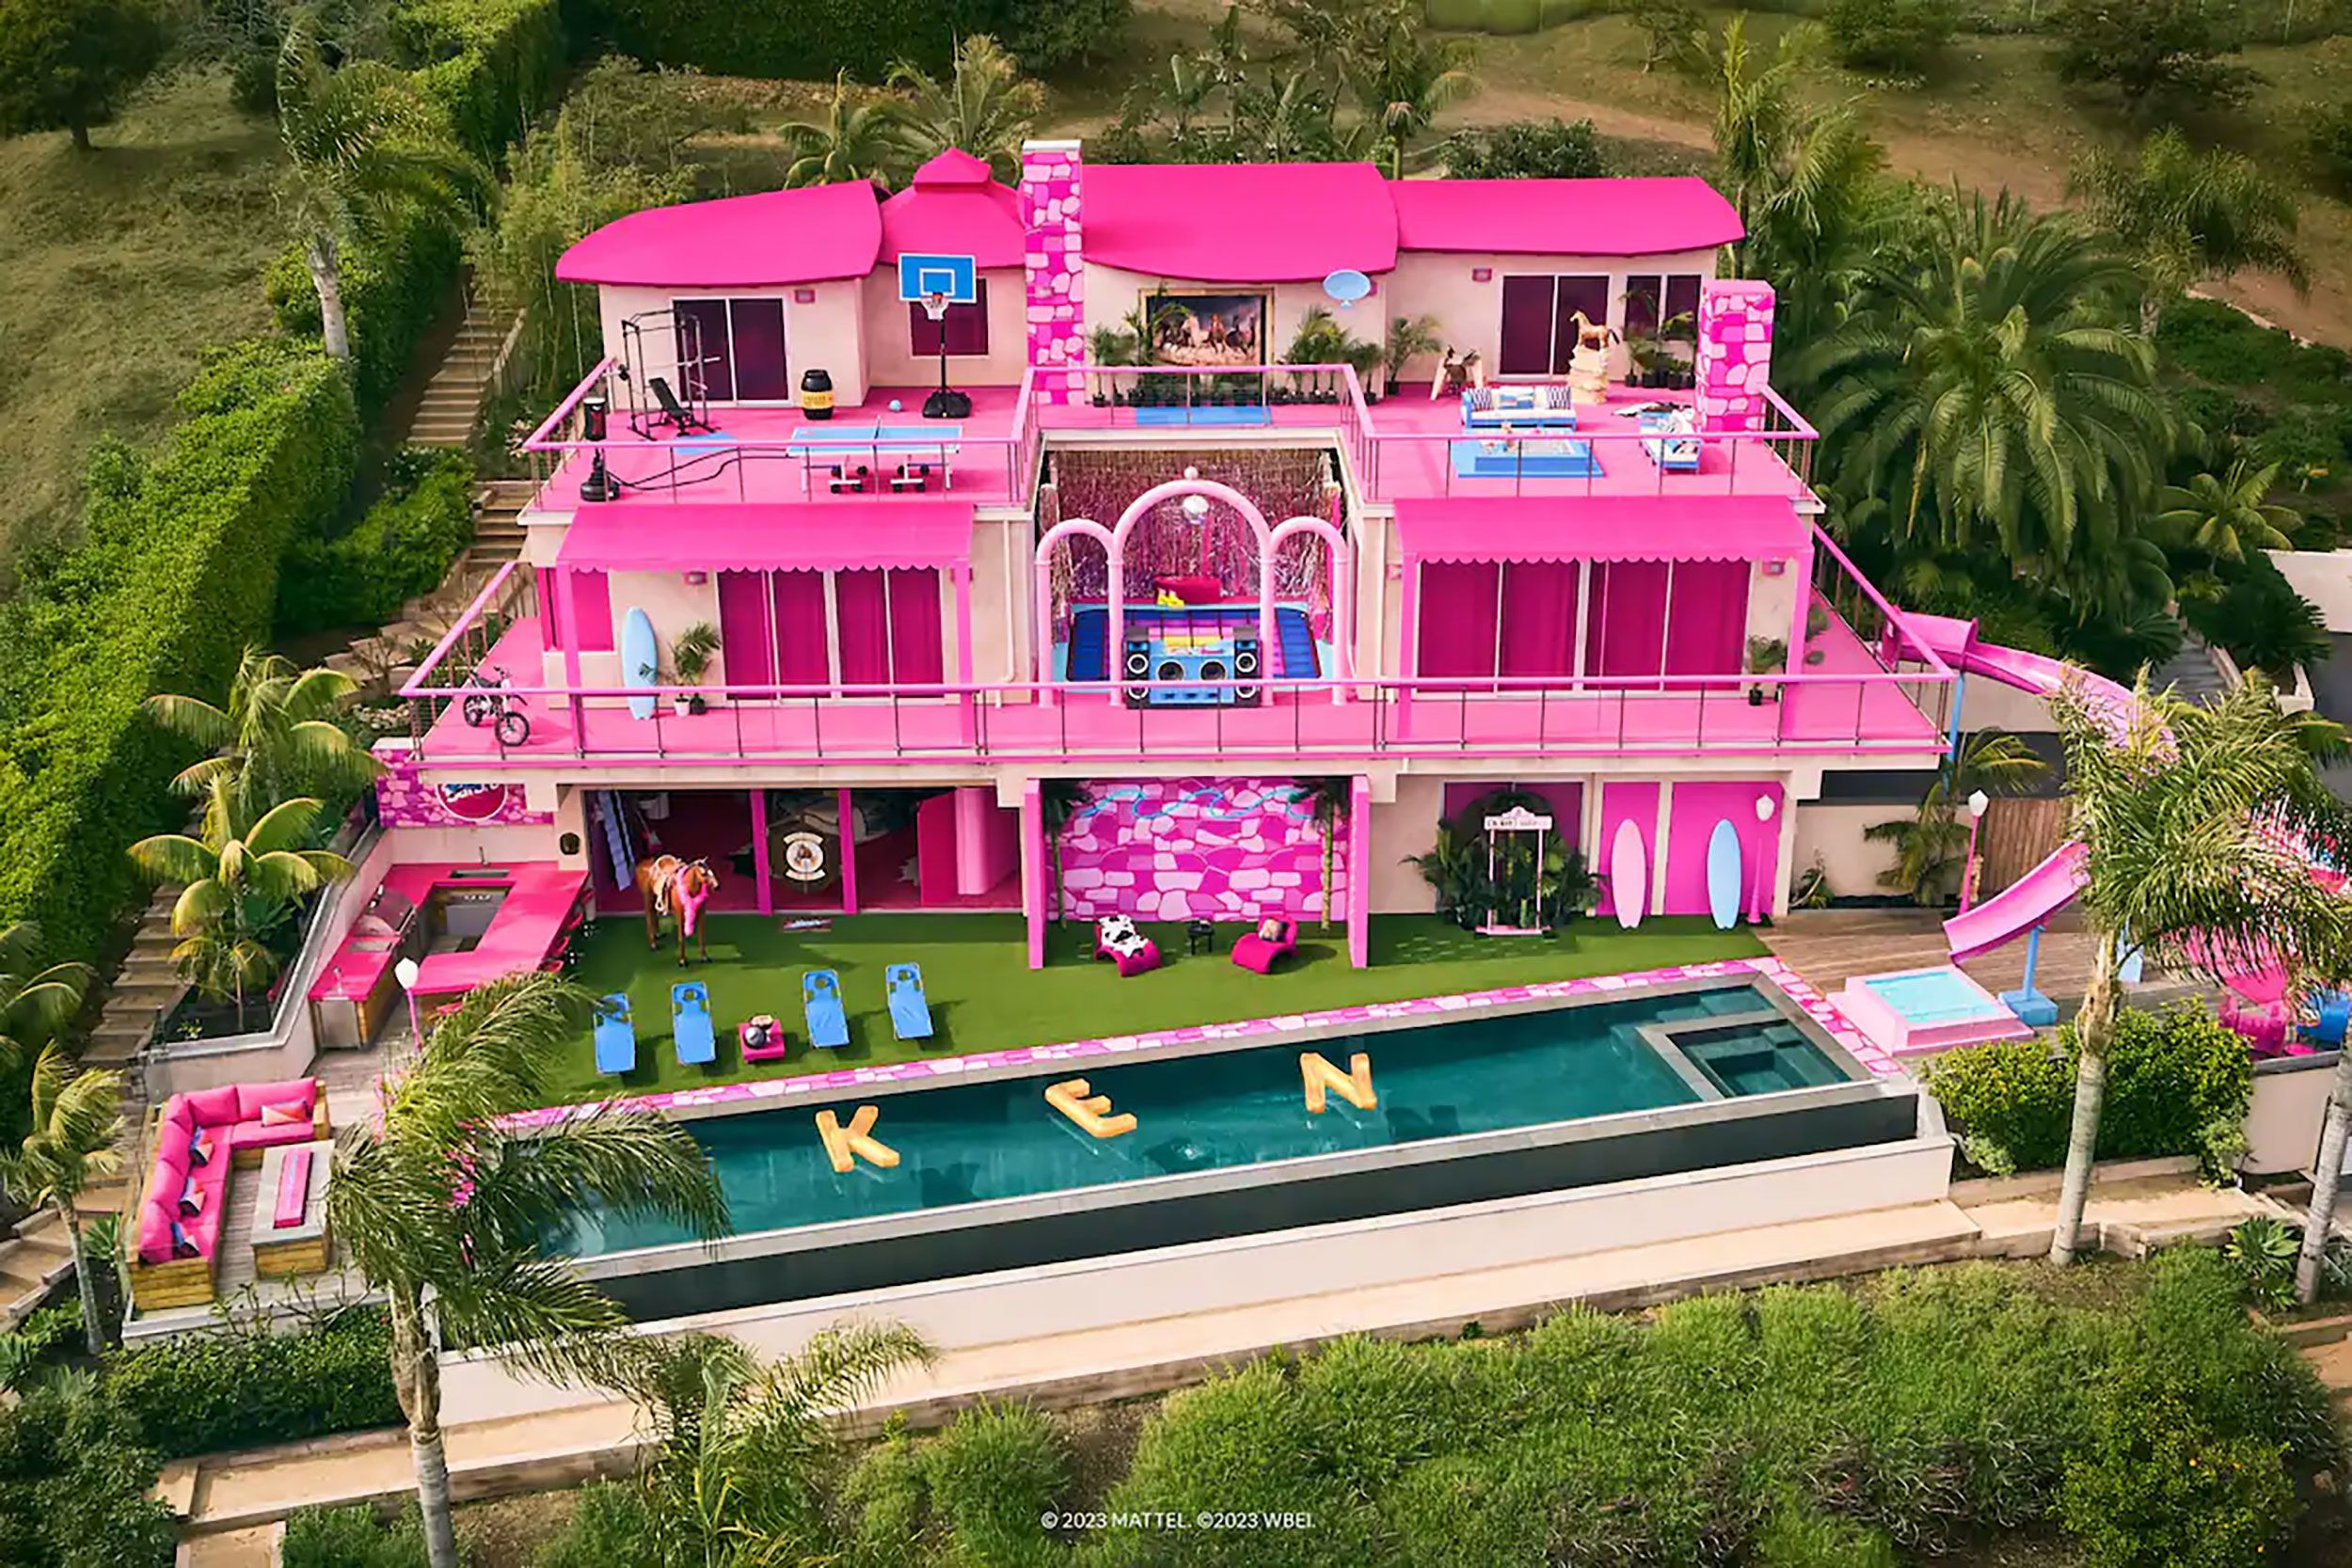 The house looks over the beach in Malibu, California.
Mandatory Credit:	From Mattel/Airbnb...